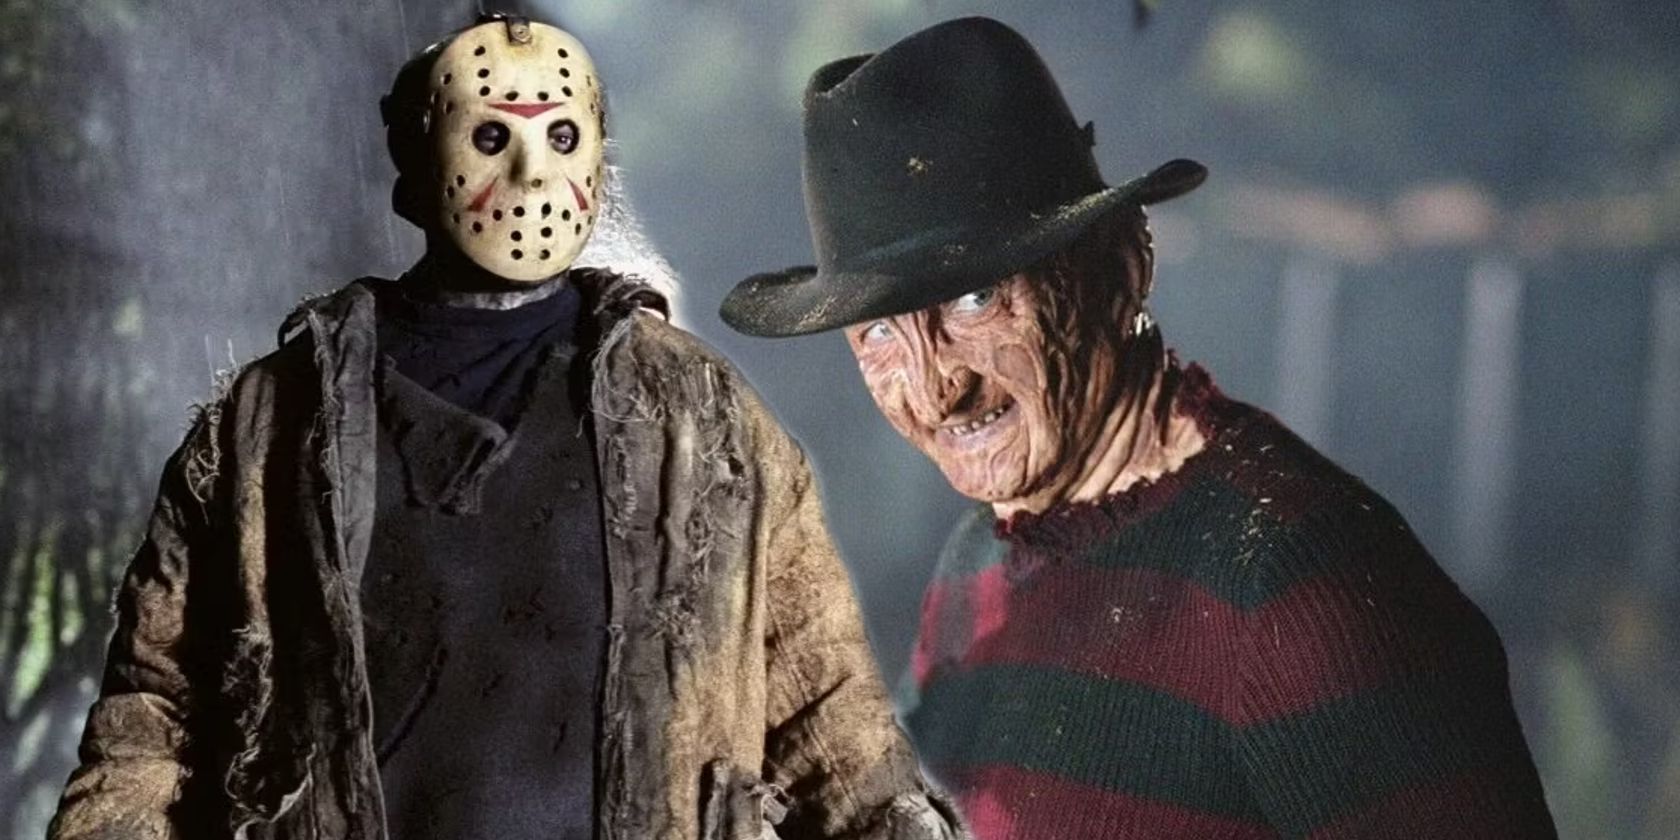 Custom image of Jason from Friday the 13th and Freddy from A Nightmare on Elm Street